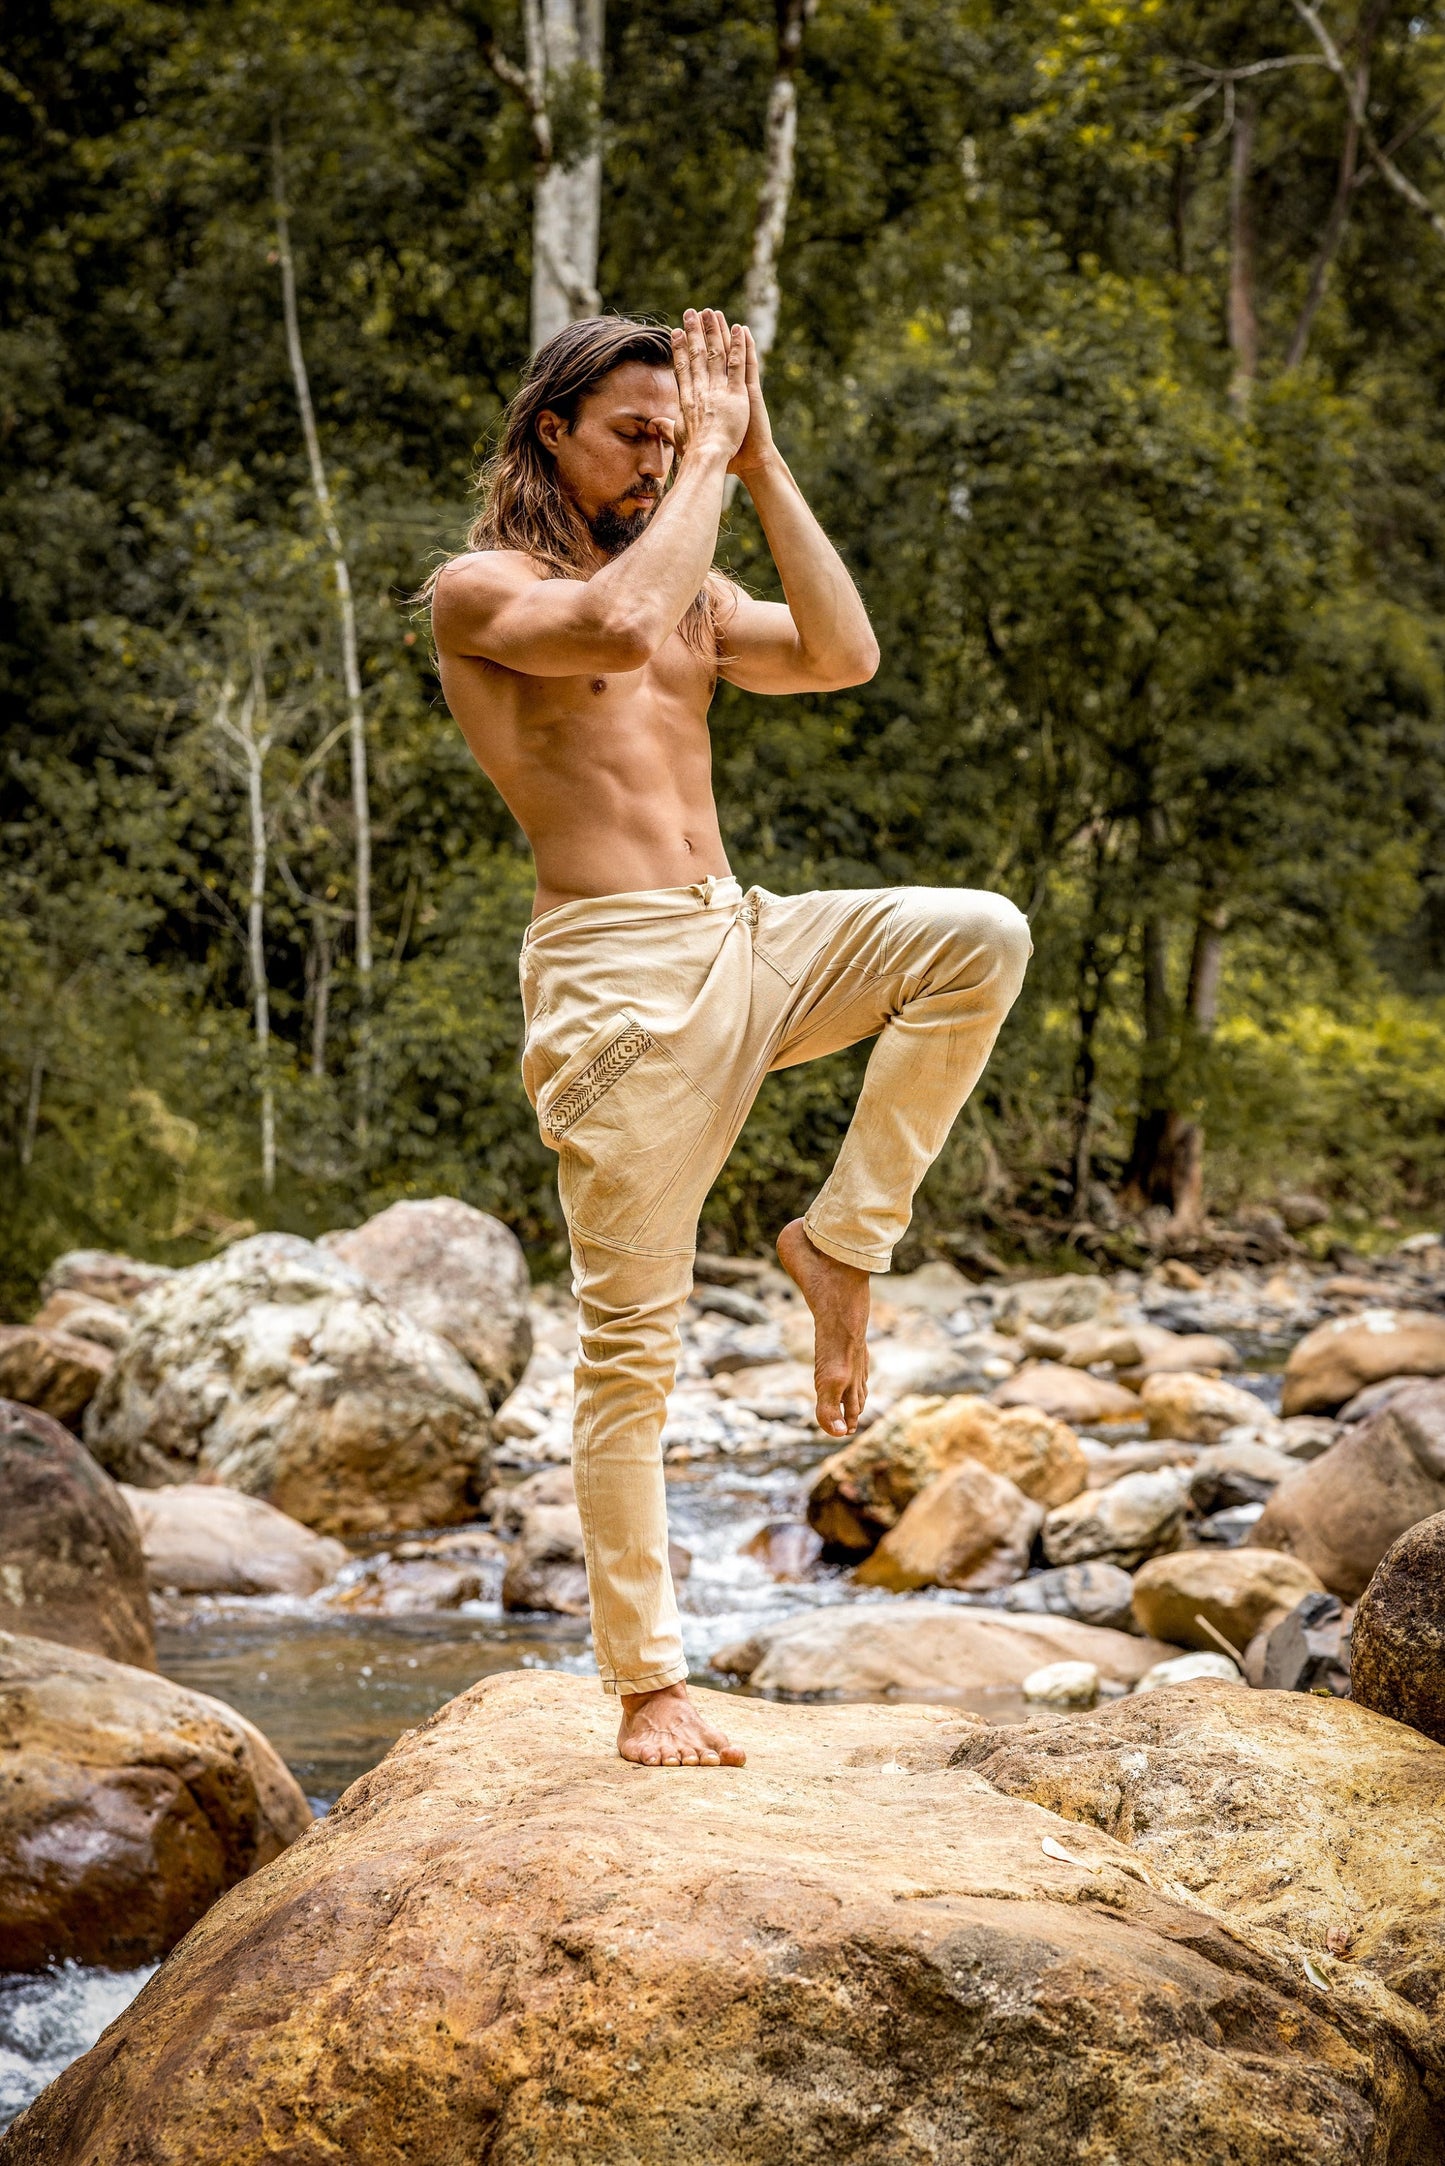 Our AGILO harem pants are agile and stretchy . . . designed for comfortably engaging in physical activities such as yoga, rock climbing, festivals and hiking. 

Made of 95% cotton and 5% spandex, they are super flexible!